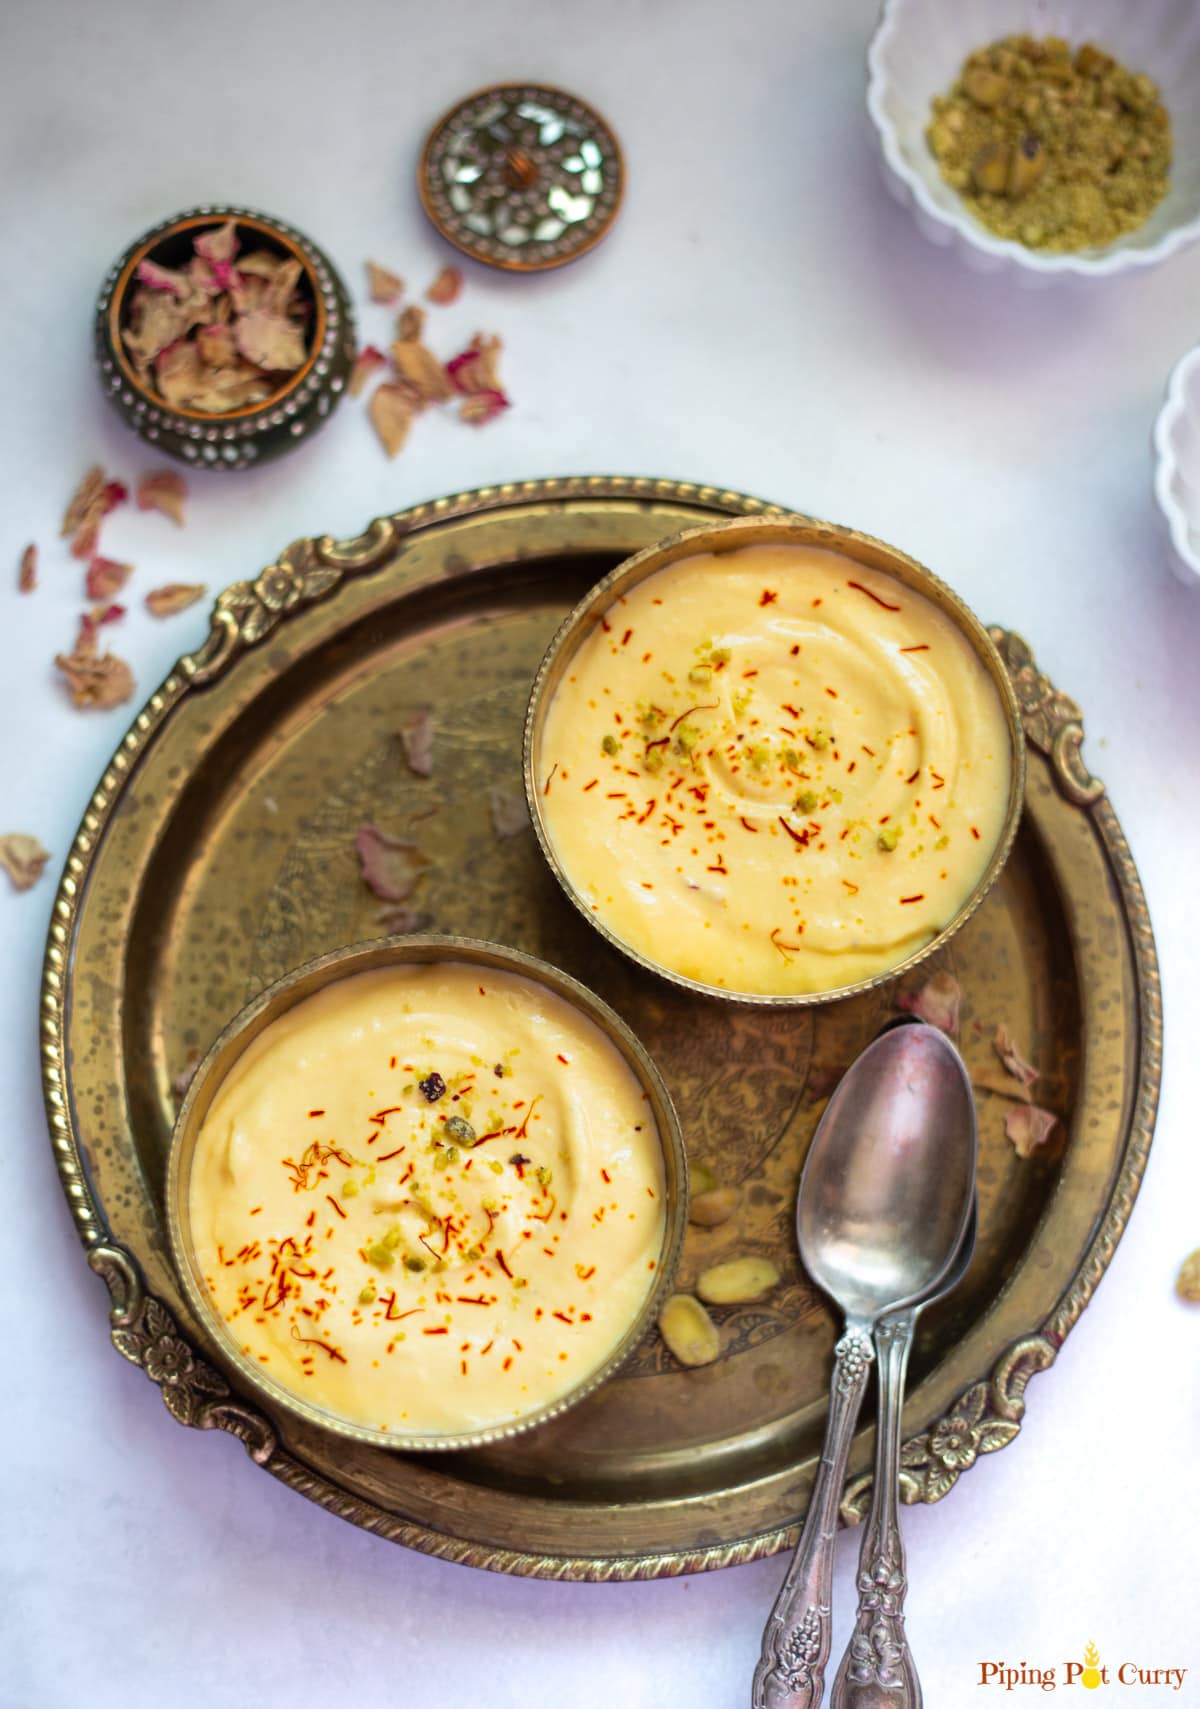 2 small bowls of Indian Mango Shrikhand dessert garnished with saffron and pistachios. 